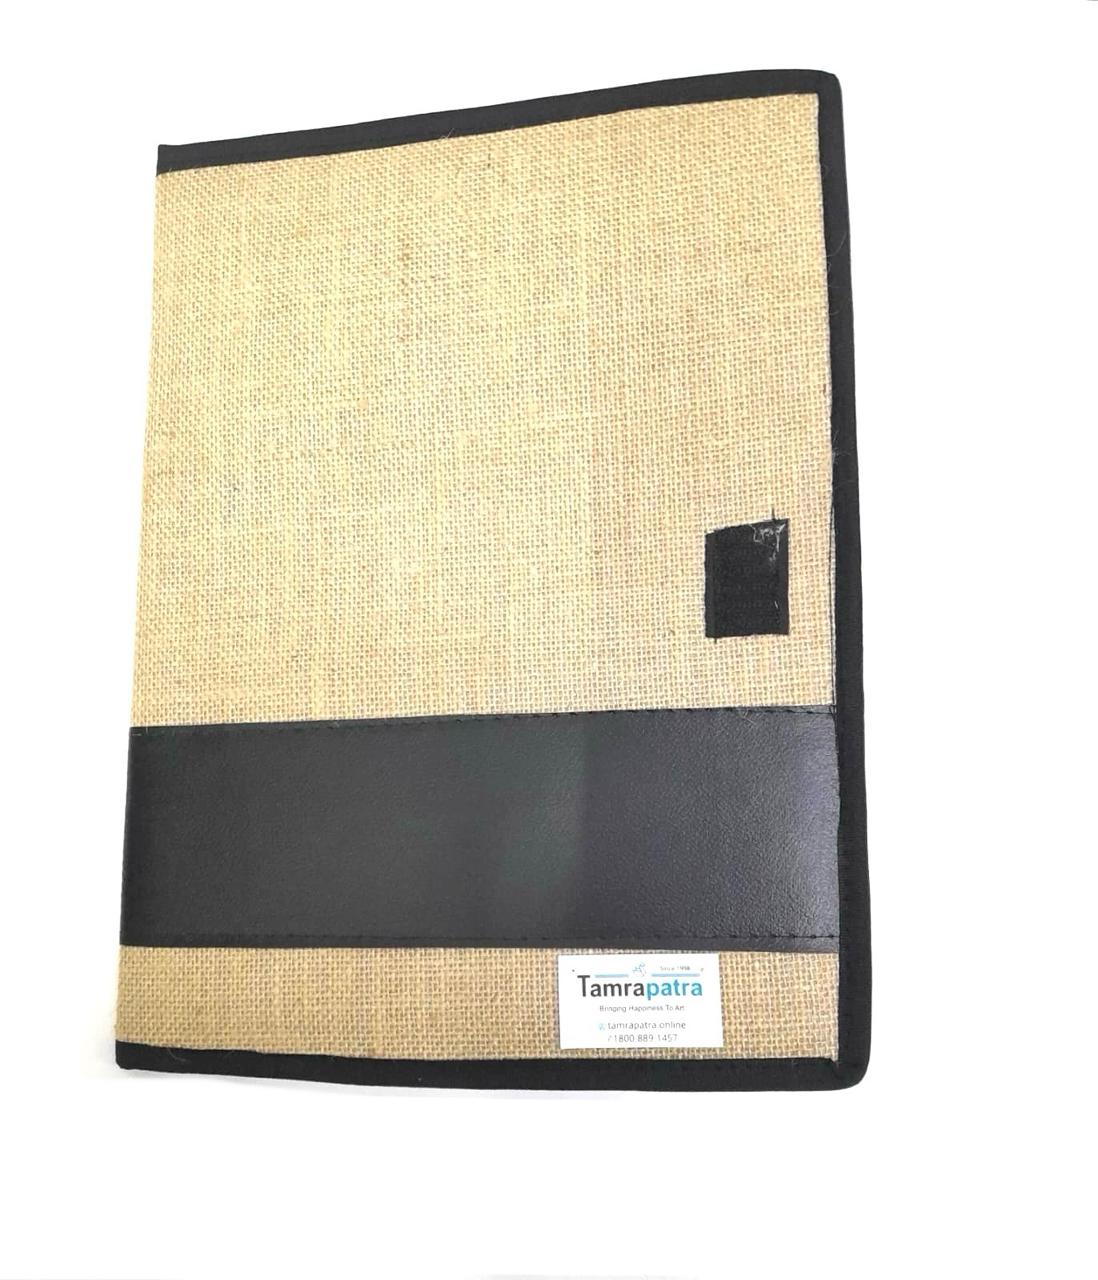 Jute Design Folder To Store Documents Gifting Officer Handmade From Tamrapatra